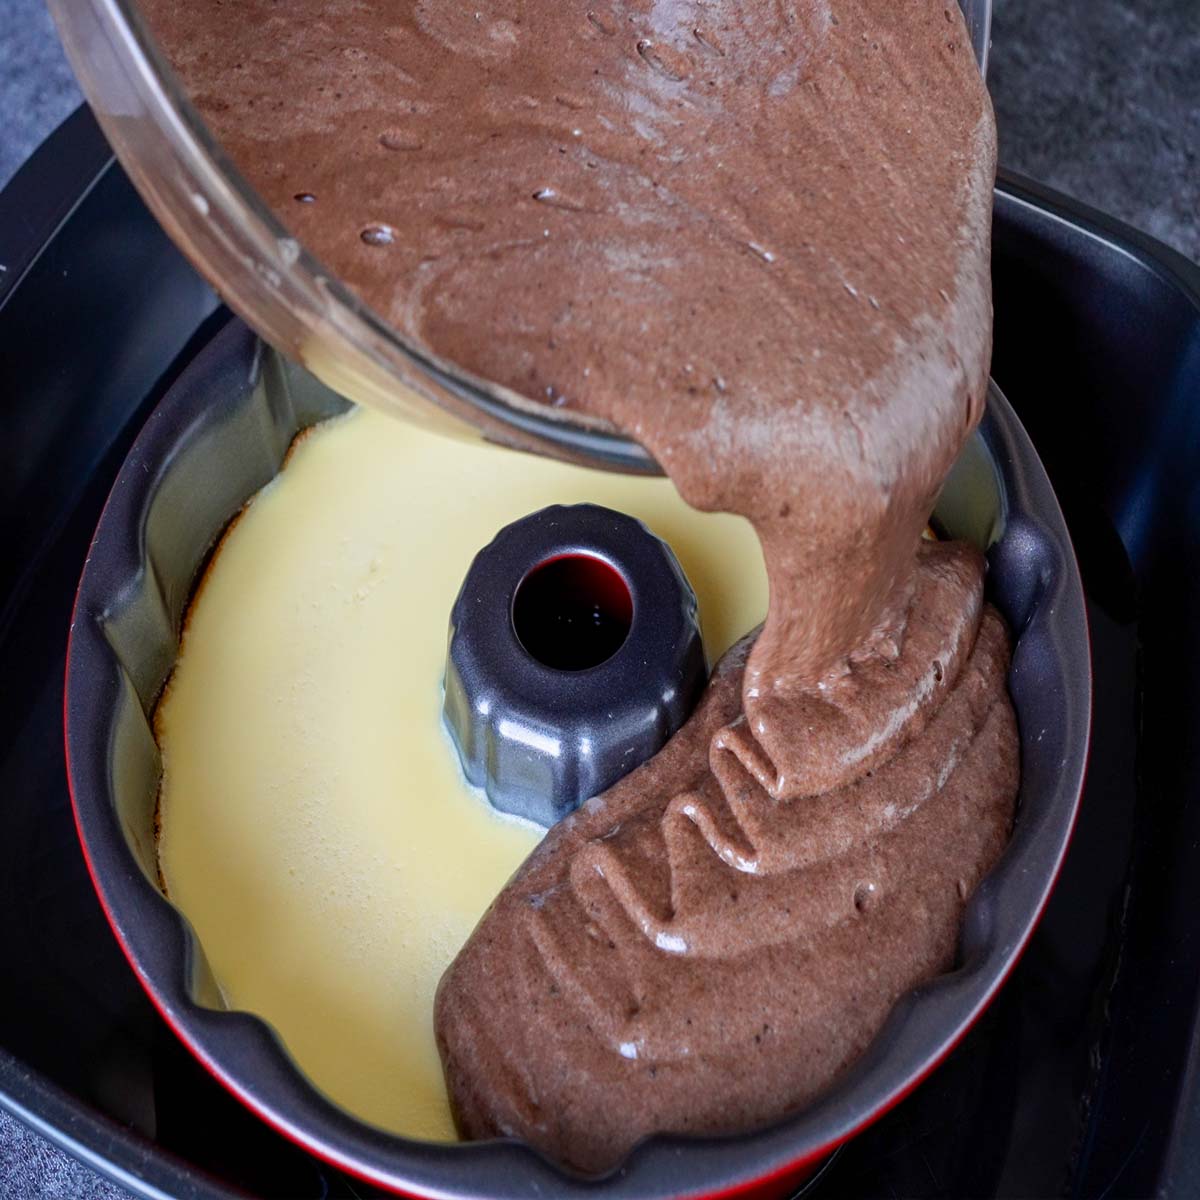 Chocoflan Recipe: Create the Perfect Combination of Flavors